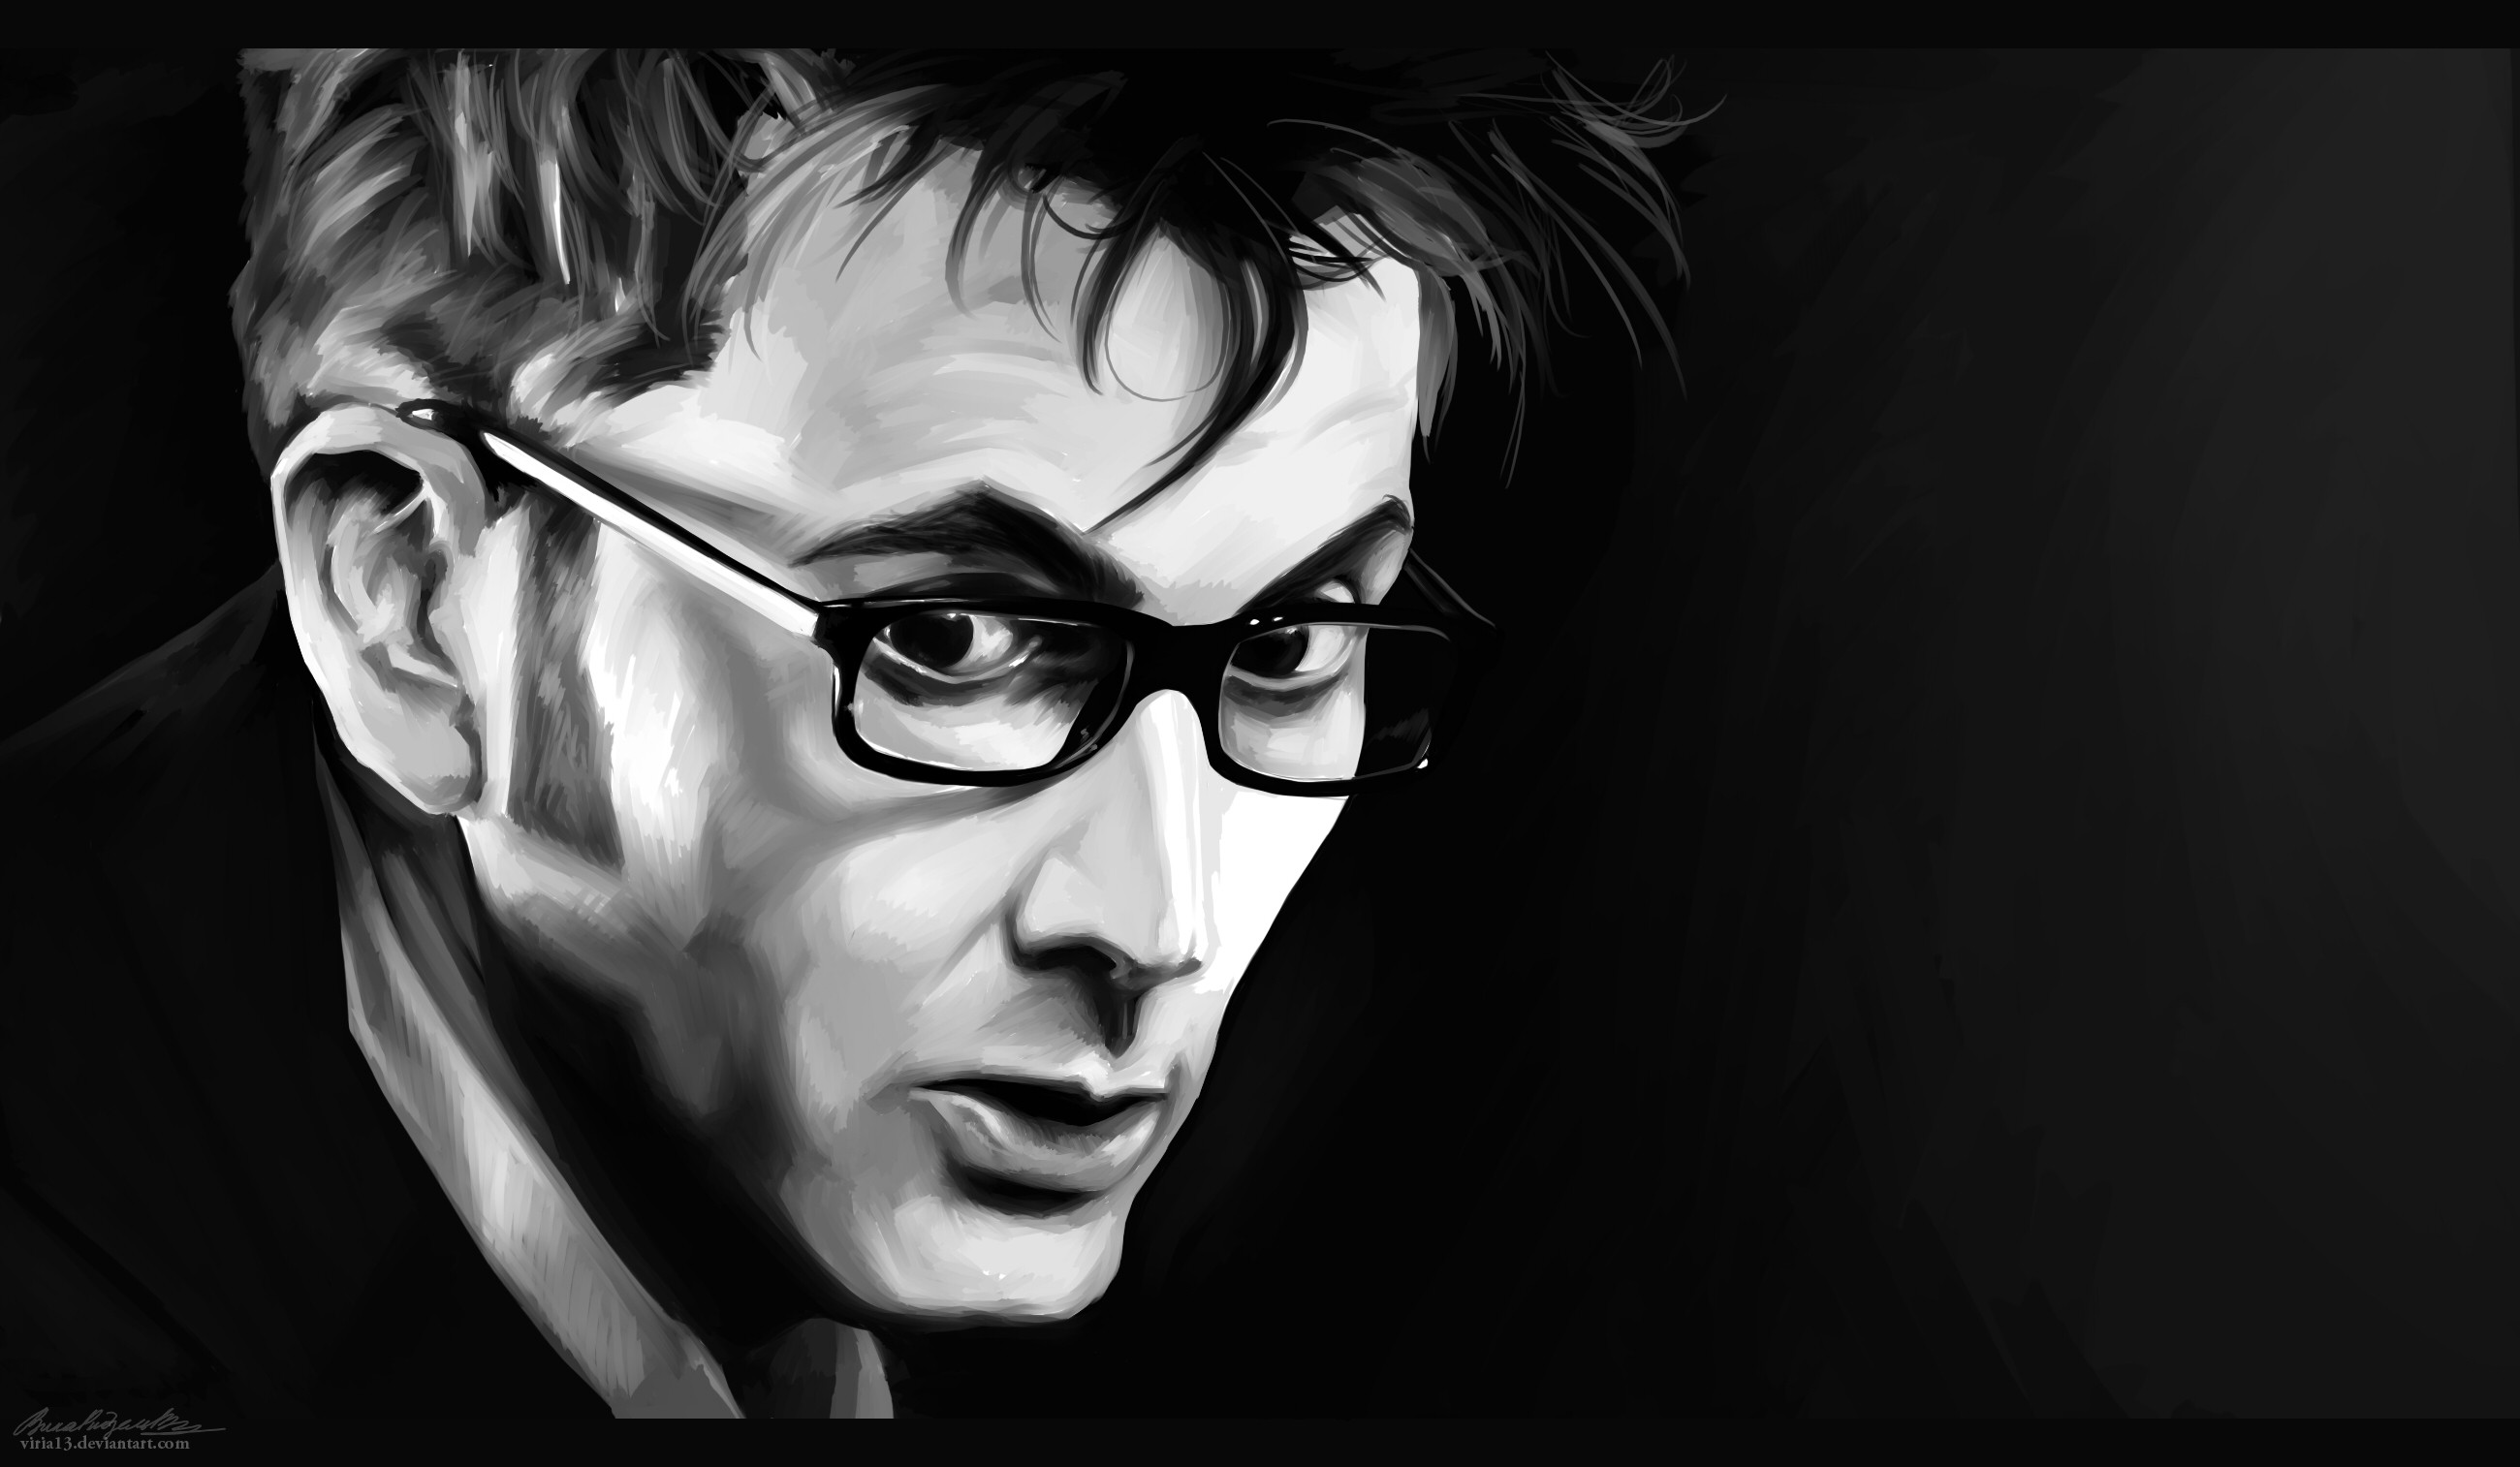 General 2600x1514 Doctor Who The Doctor David Tennant monochrome Tenth Doctor black TV series Science Fiction Men science fiction digital art simple background watermarked